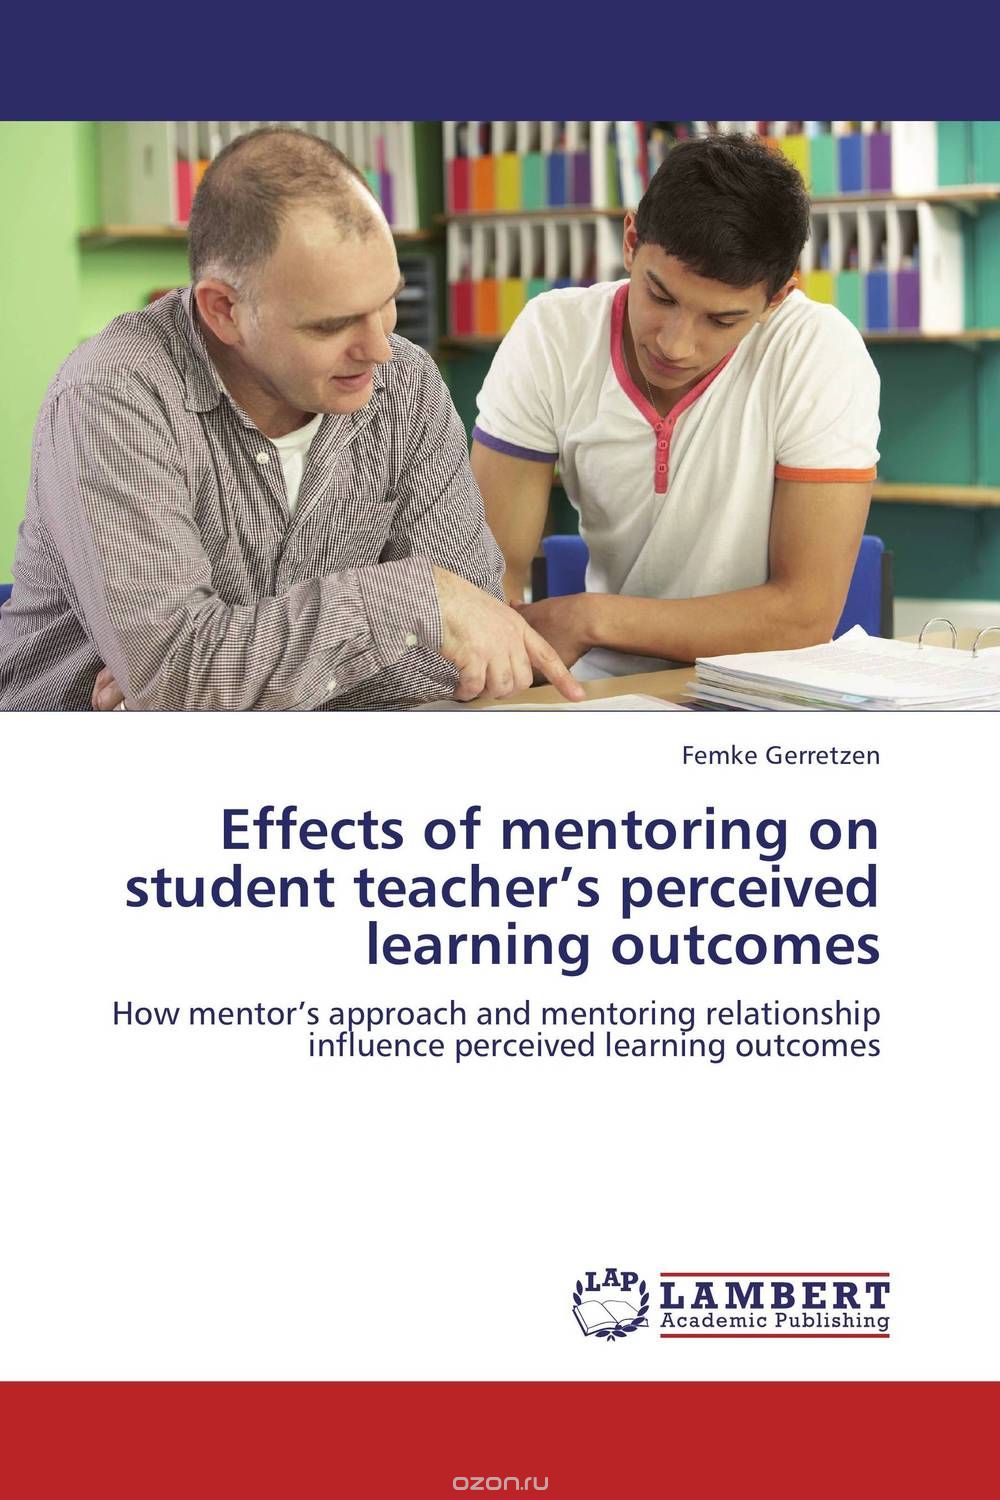 Скачать книгу "Effects of mentoring on student teacher’s perceived learning outcomes"